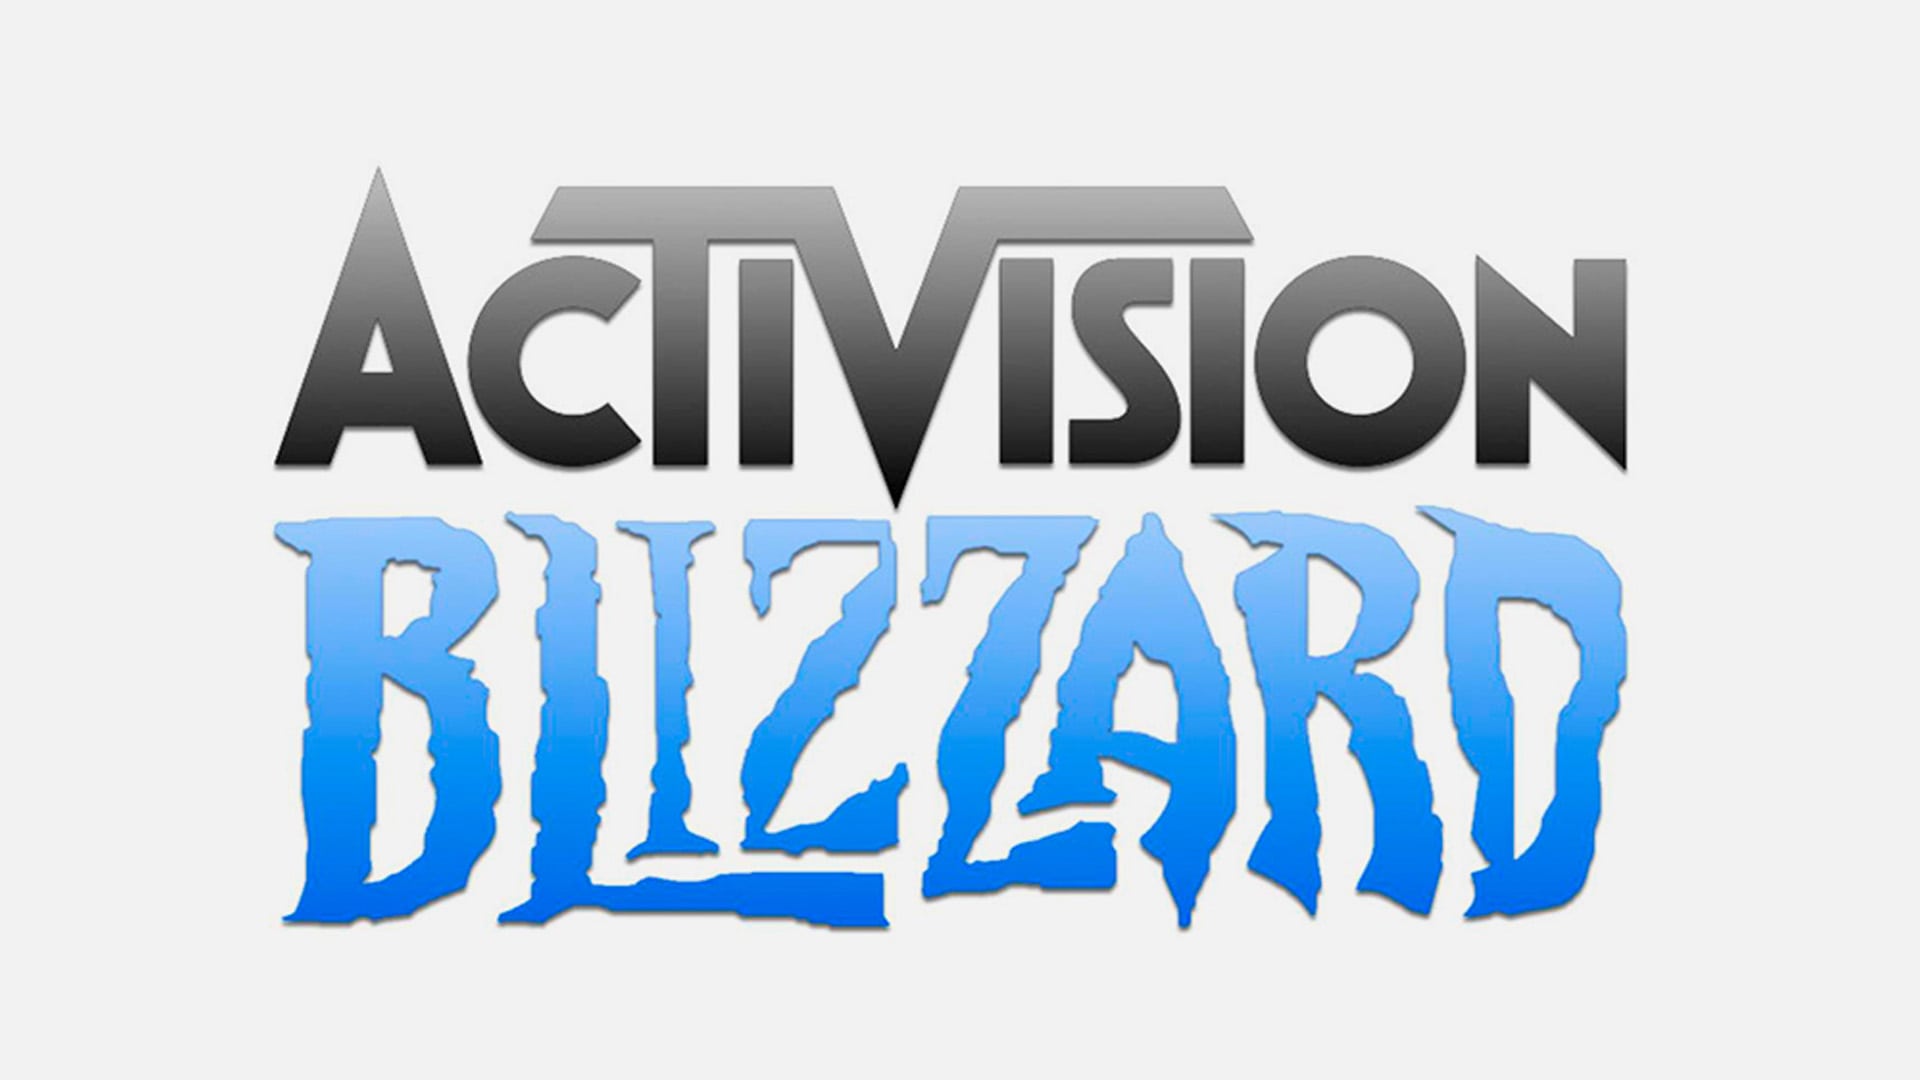 Logo of Activision Blizzard, a prominent gaming company.